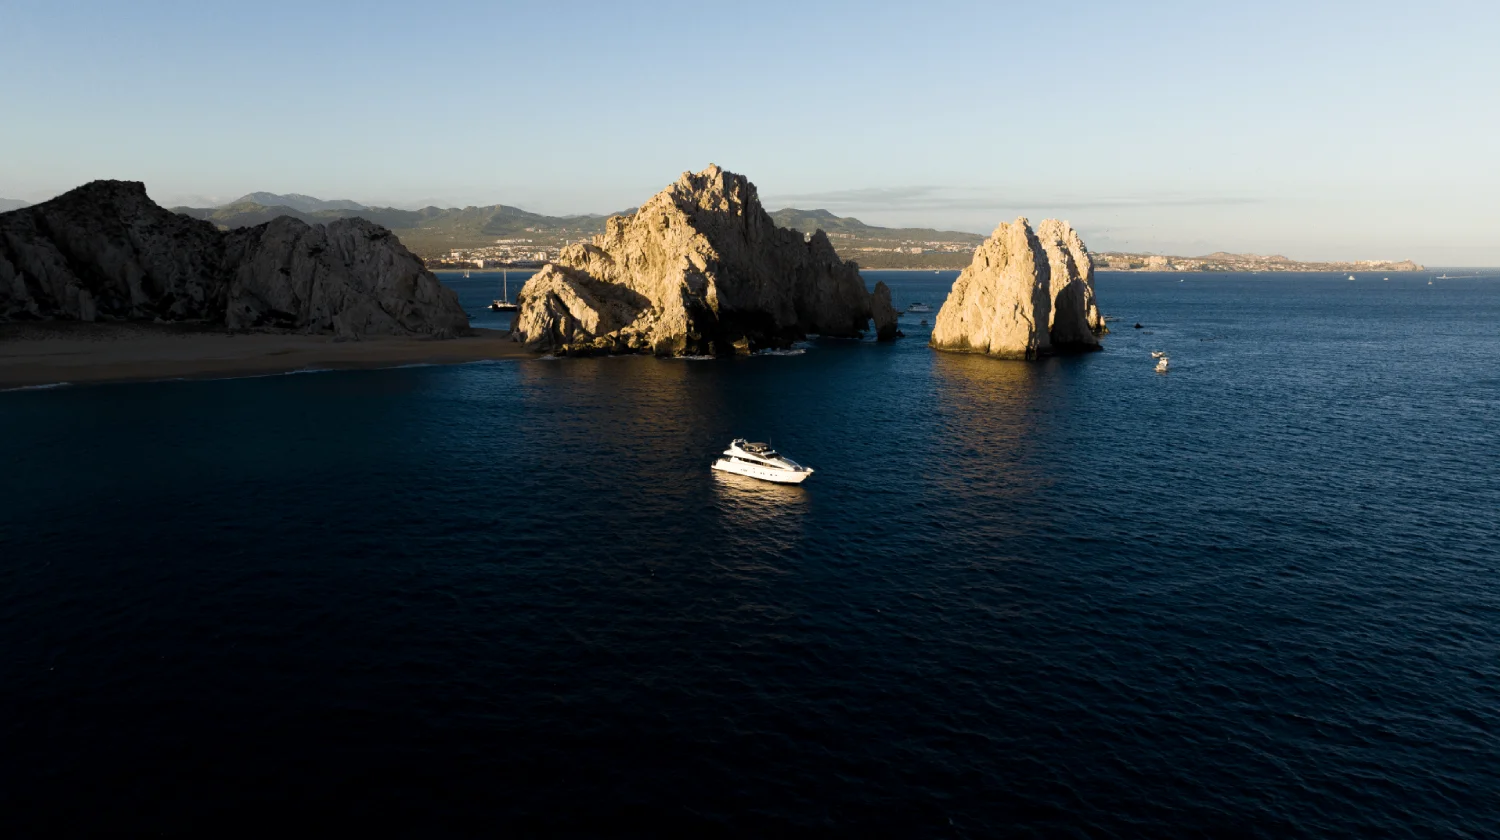 yacht rentals cabo